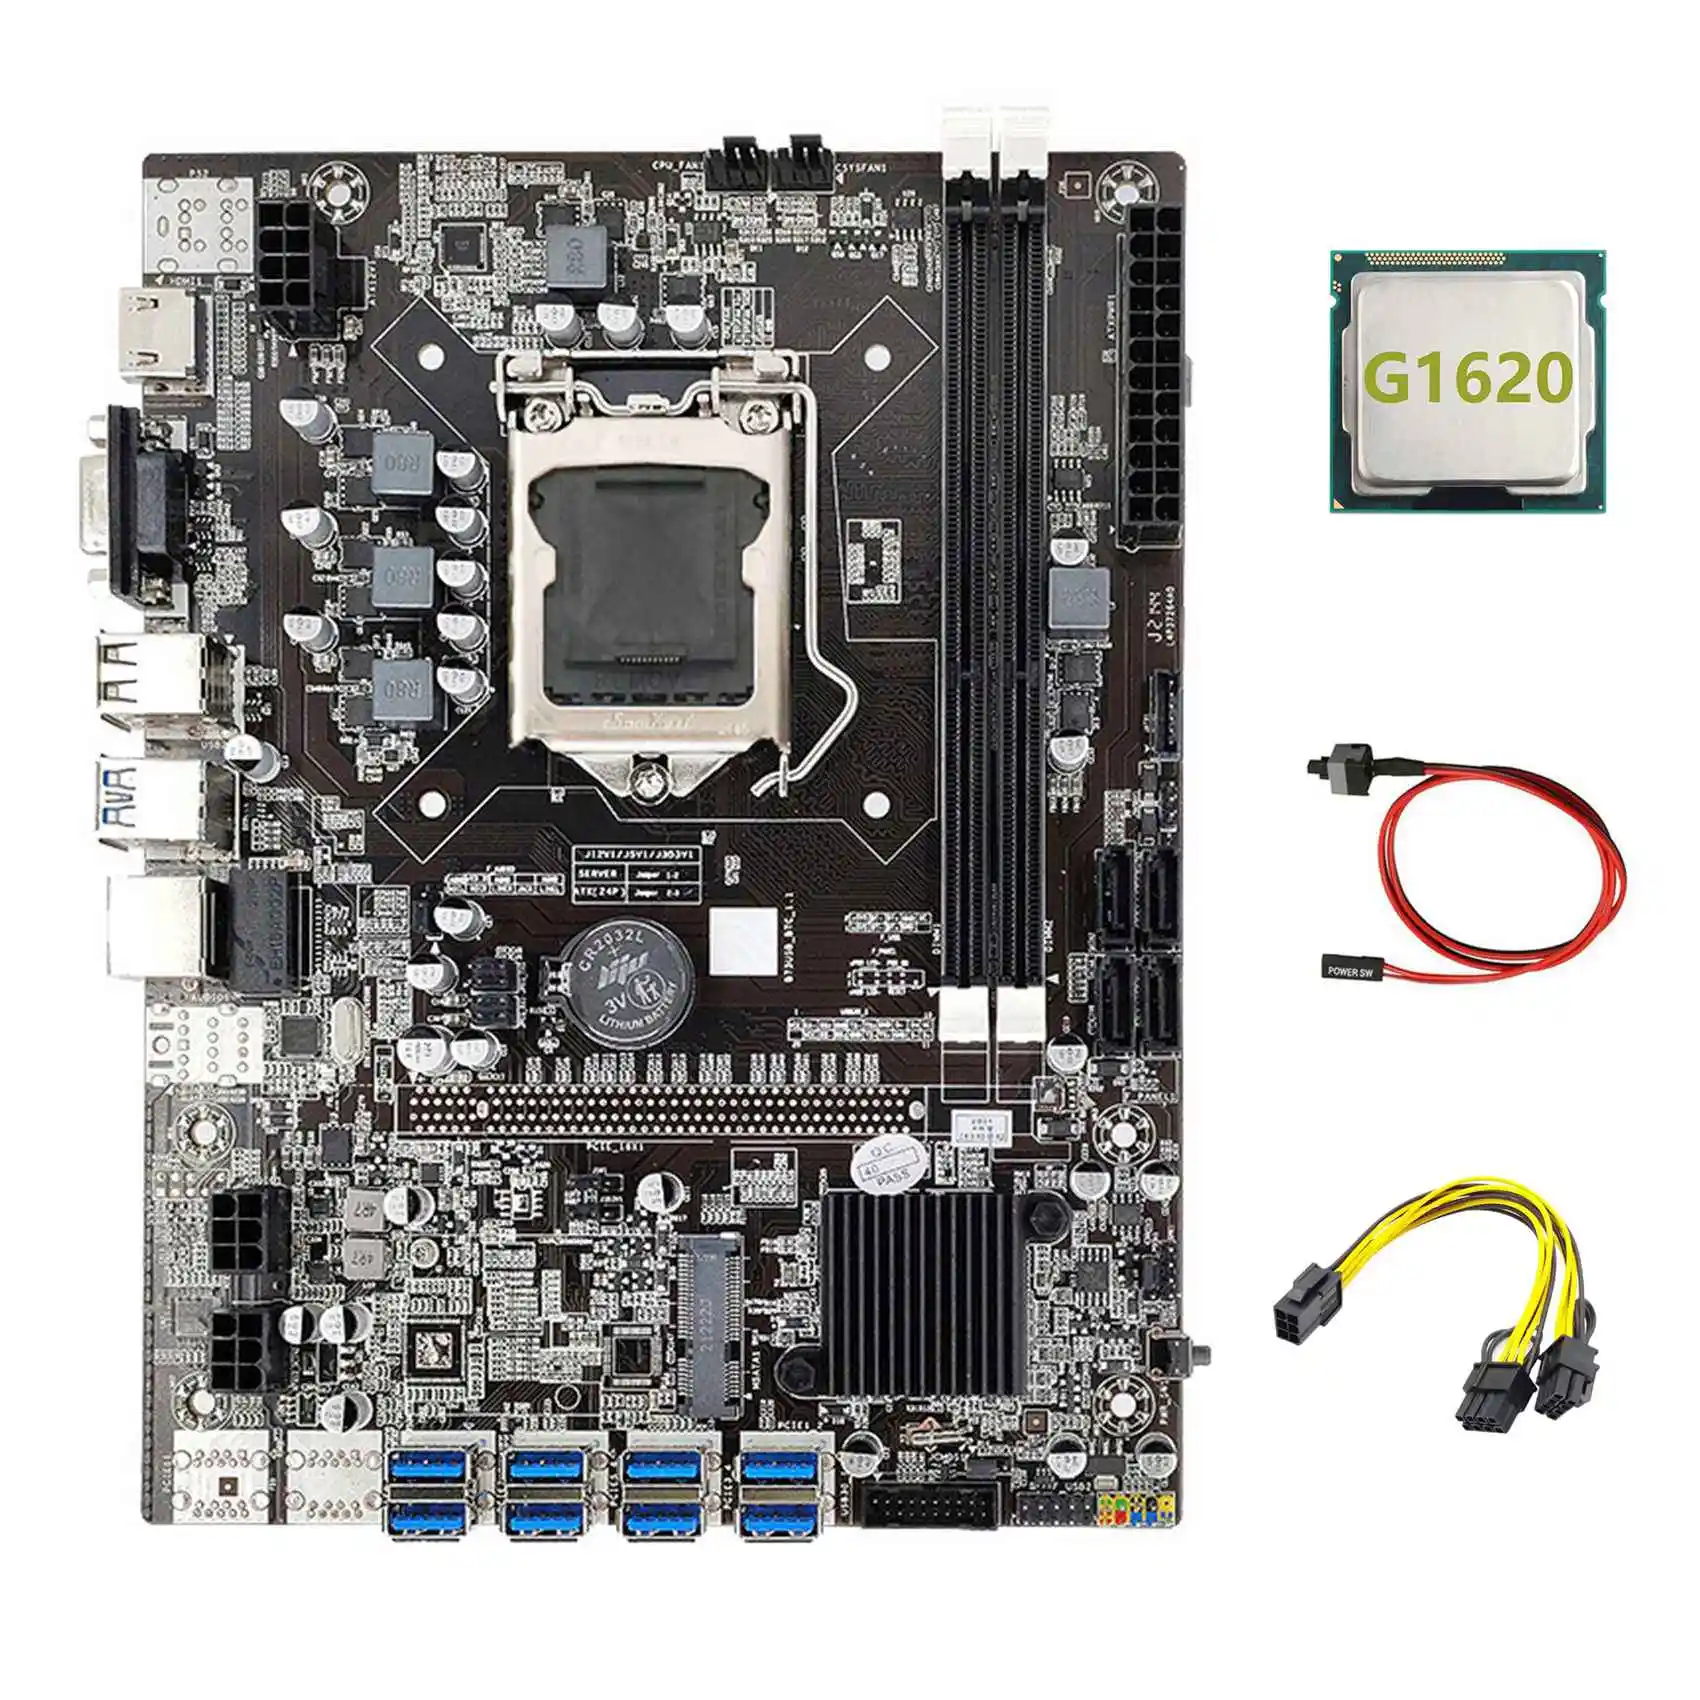 B75 ETH Mining Motherboard 8XPCIE to USB+G1620 CPU+6Pin to Dual 8Pin Cable+Switch Cable LGA1155 B75 Miner Motherboard